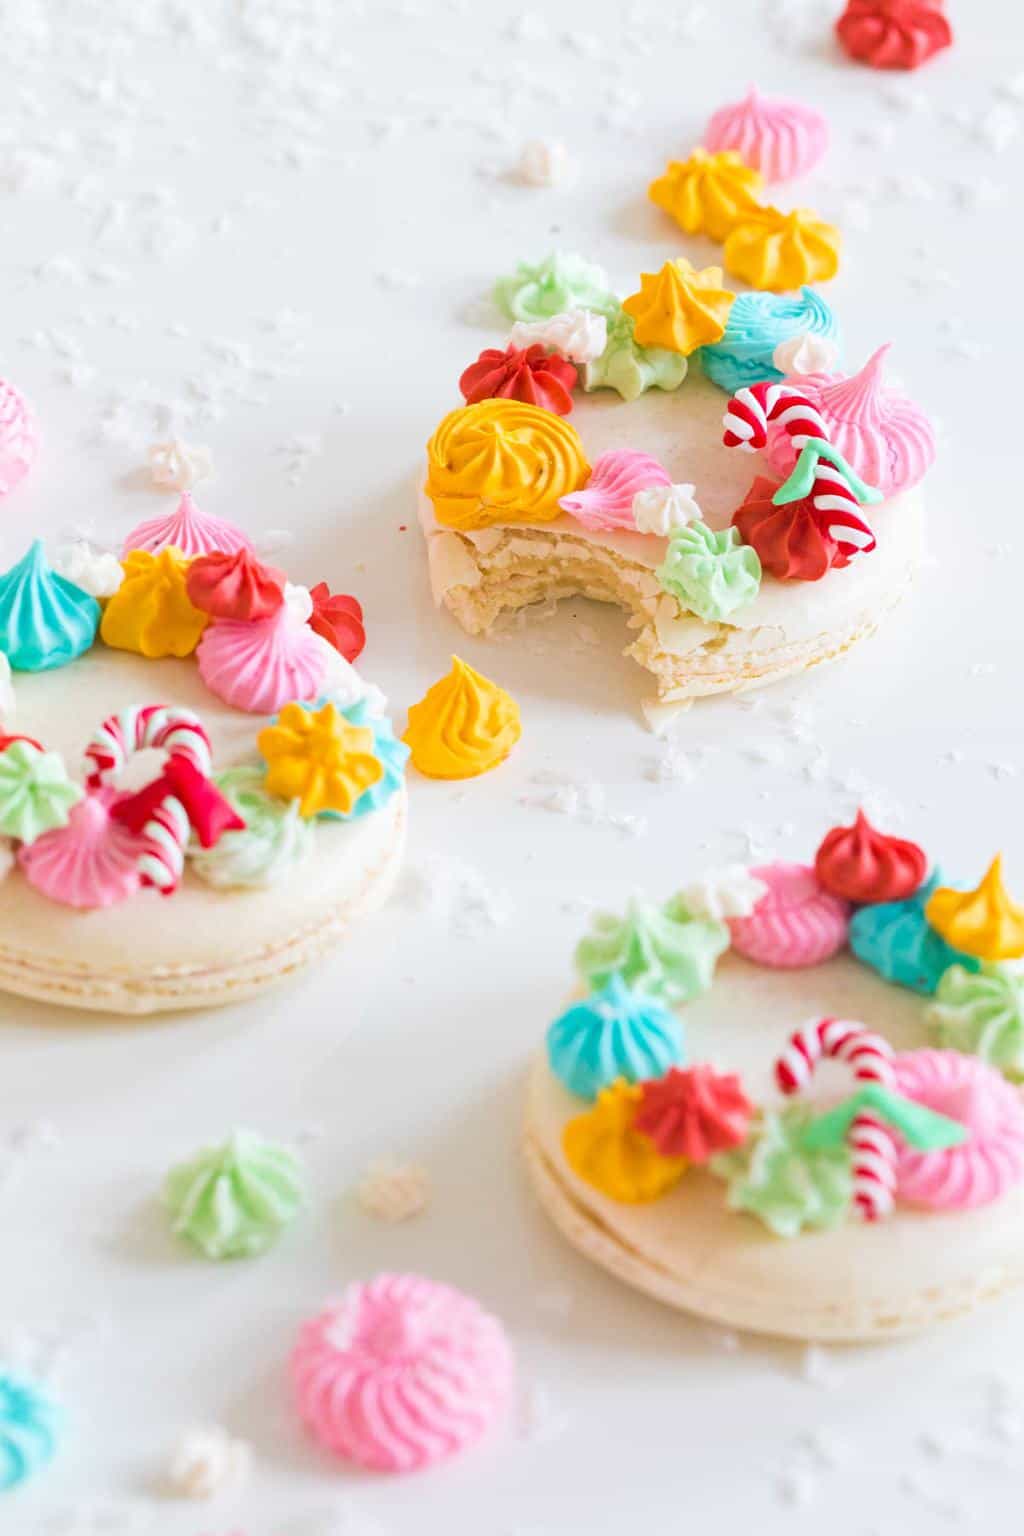 colorful holiday cookies - How to Make Holiday Wreath Meringue Macarons by top Houston lifestyle blogger Ashley Rose of Sugar & Cloth #holiday #cookies #meringues #wreath #christmas #ideas